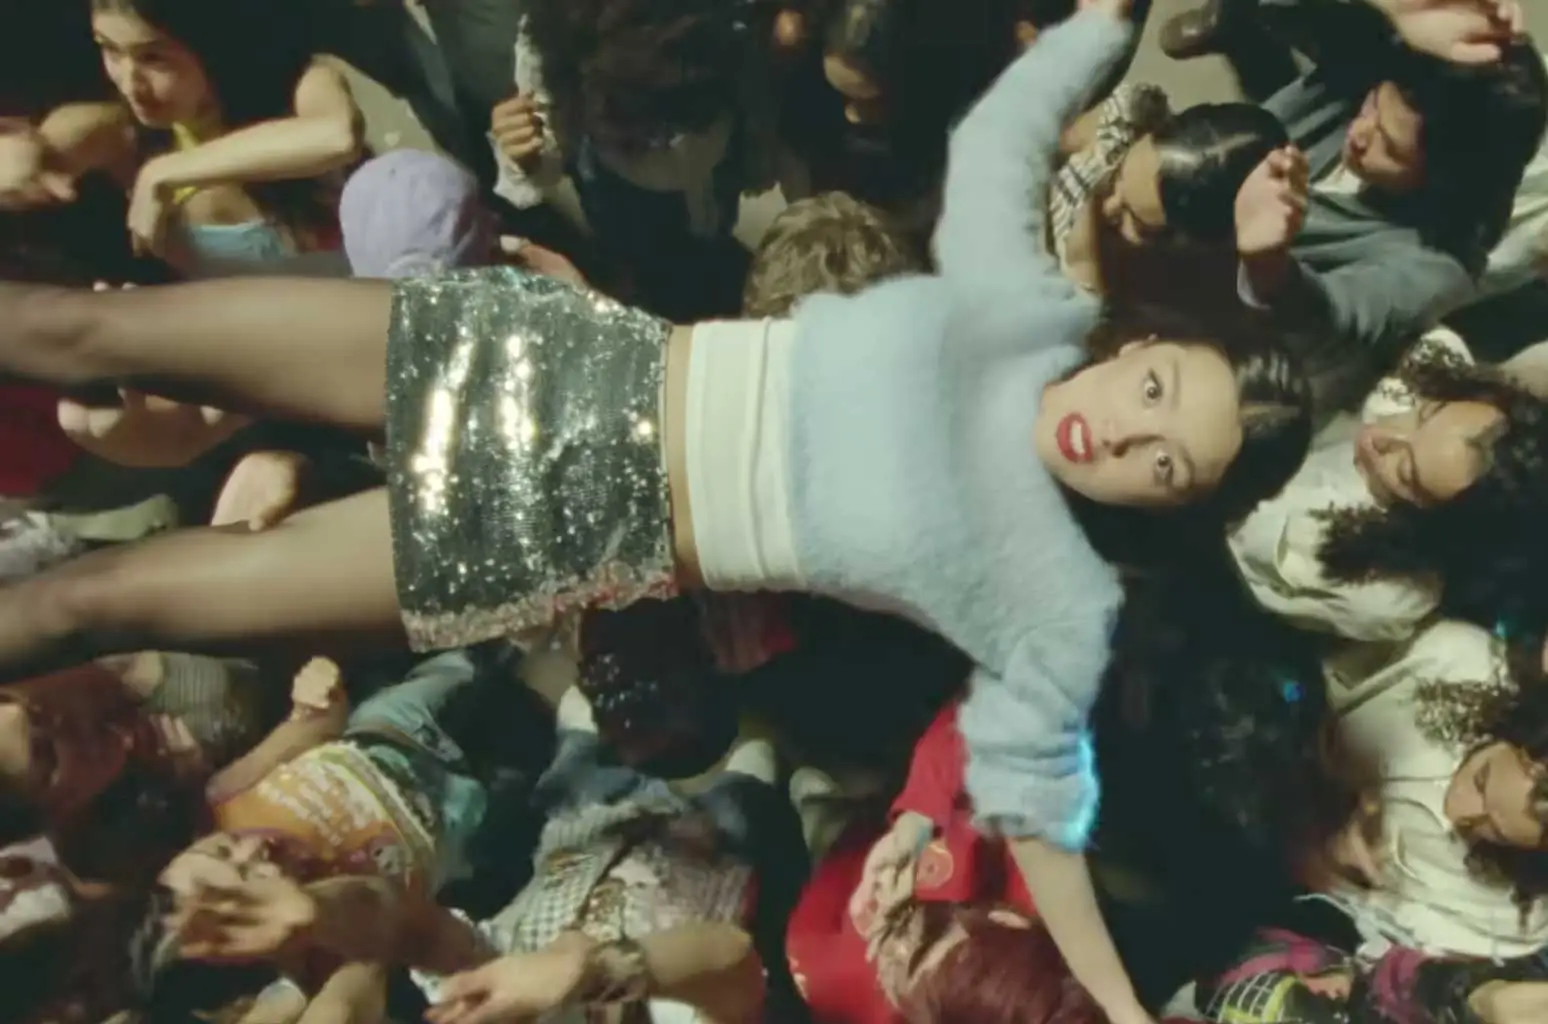 Shot from the "bad idea right?" music video: Olivia crowd surfing at a party. 